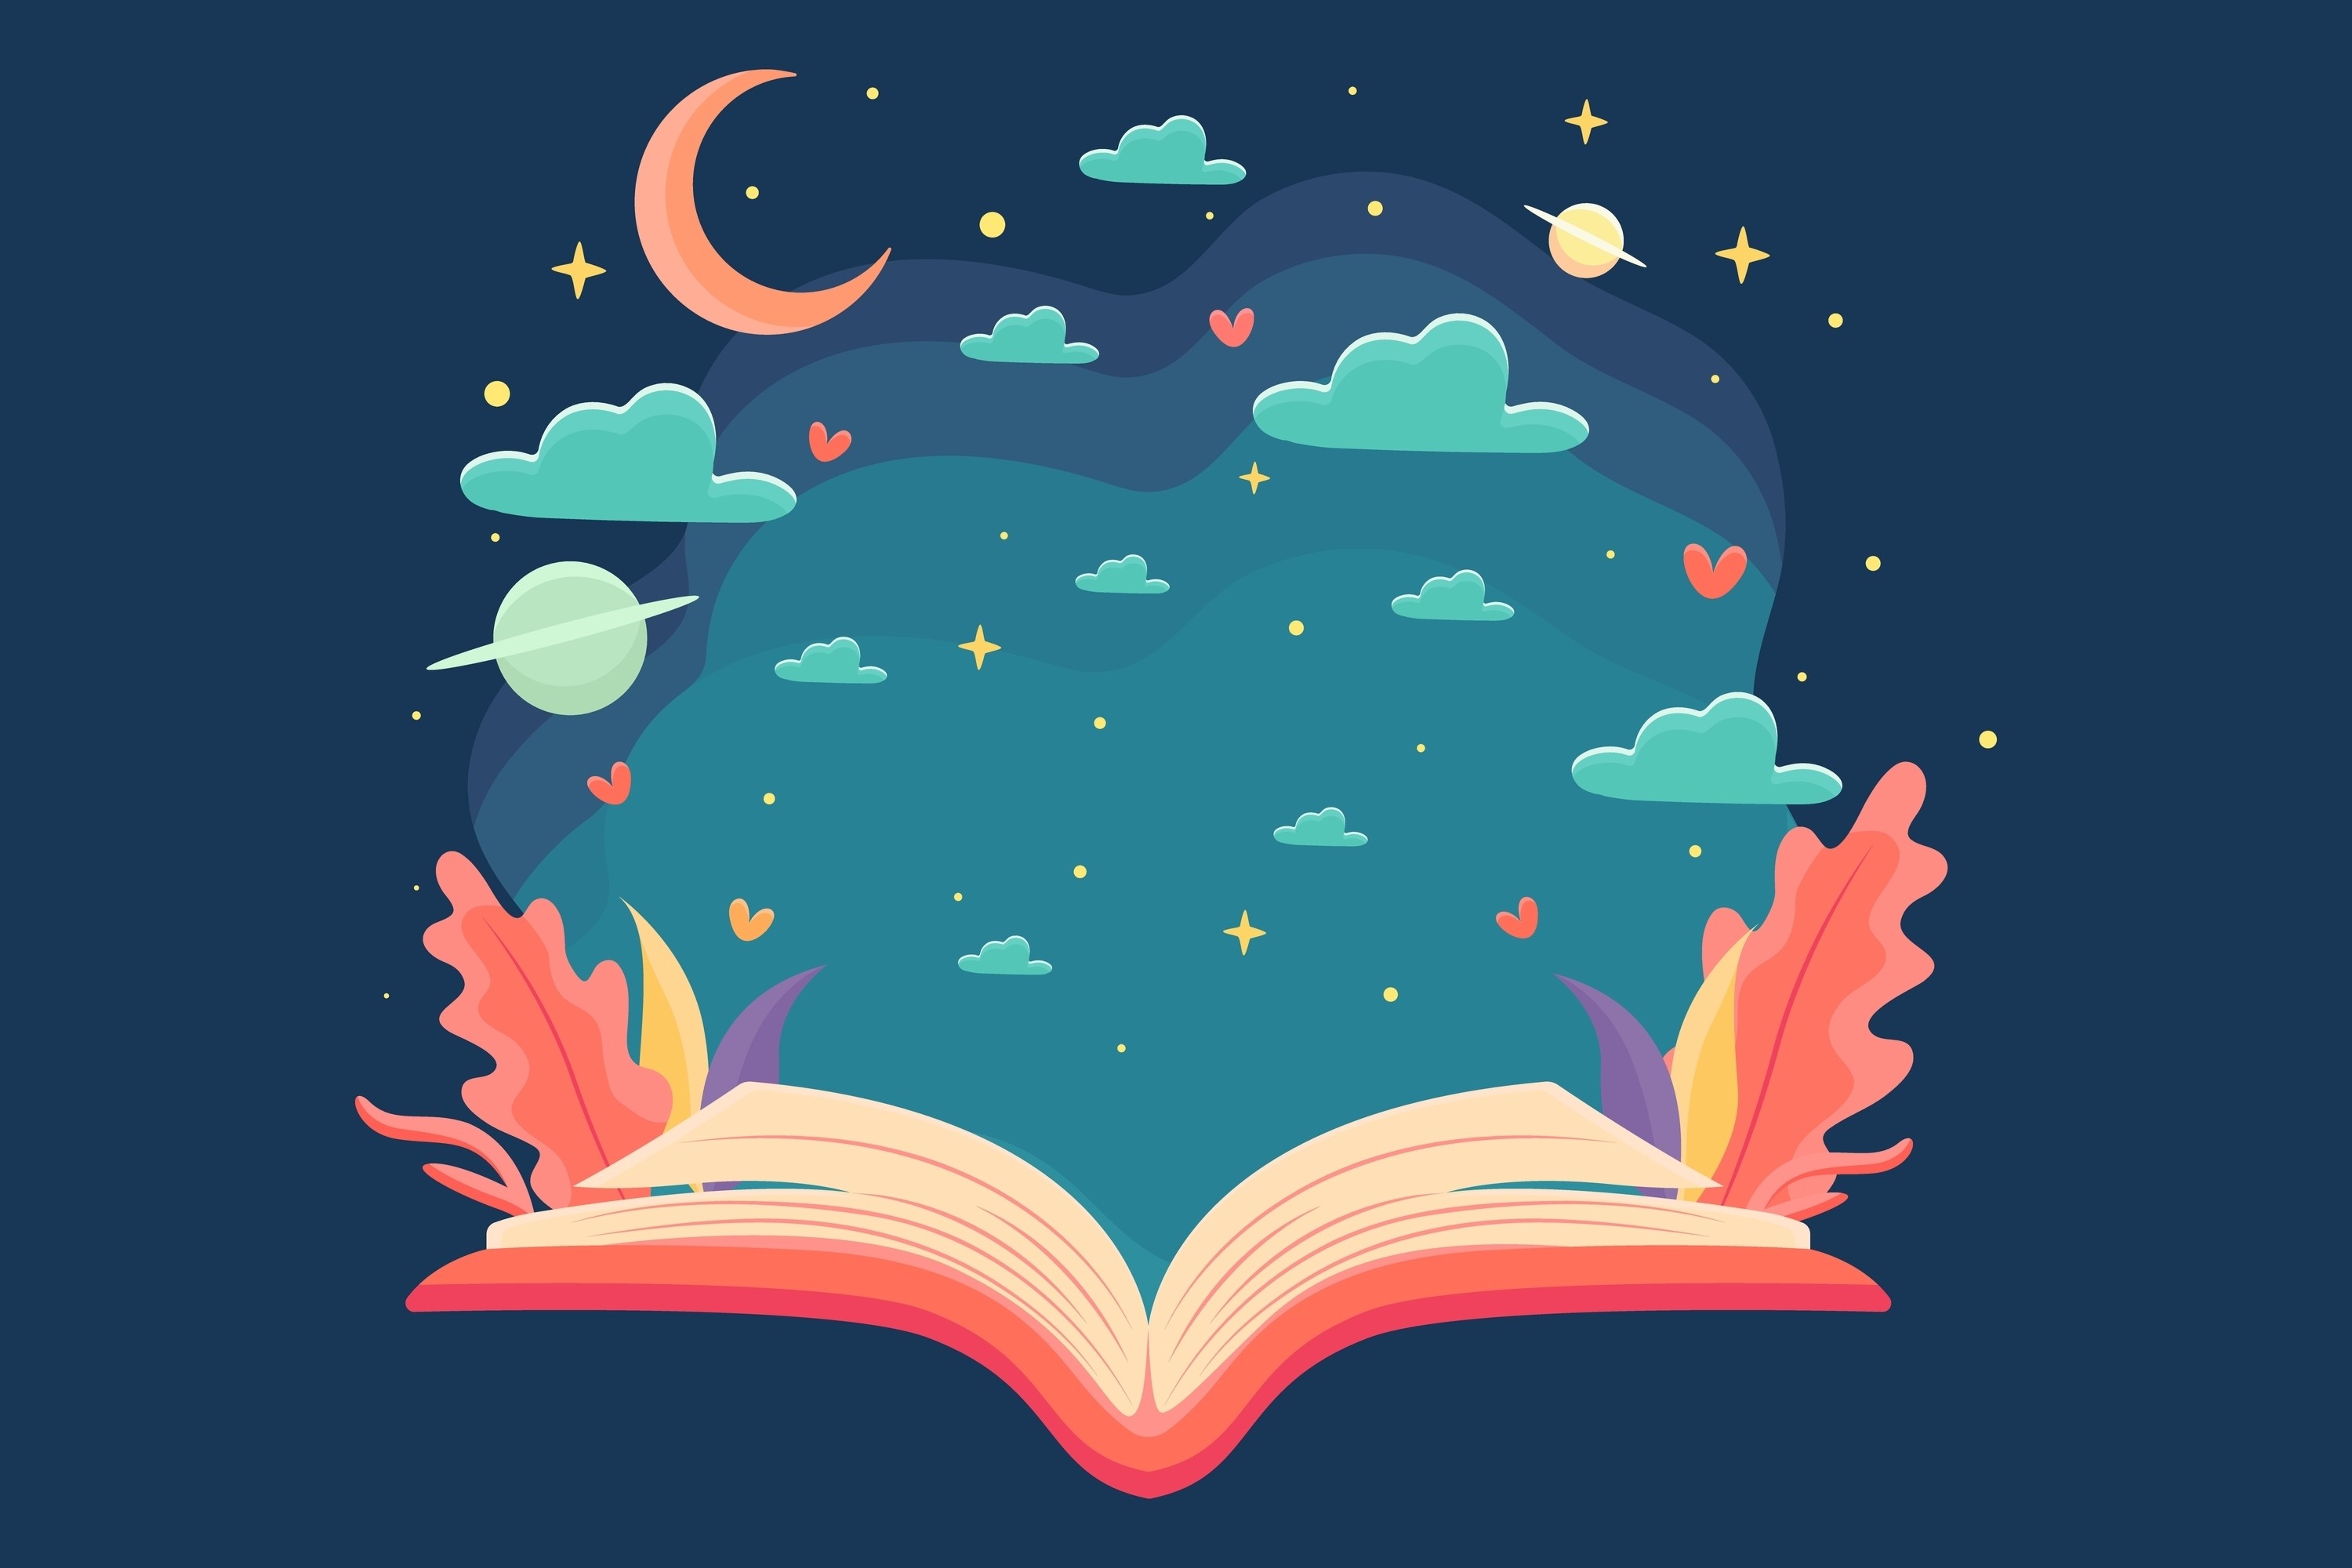 Give the world some insight into your dreams through the magic of poetry. Photo: Shutterstock